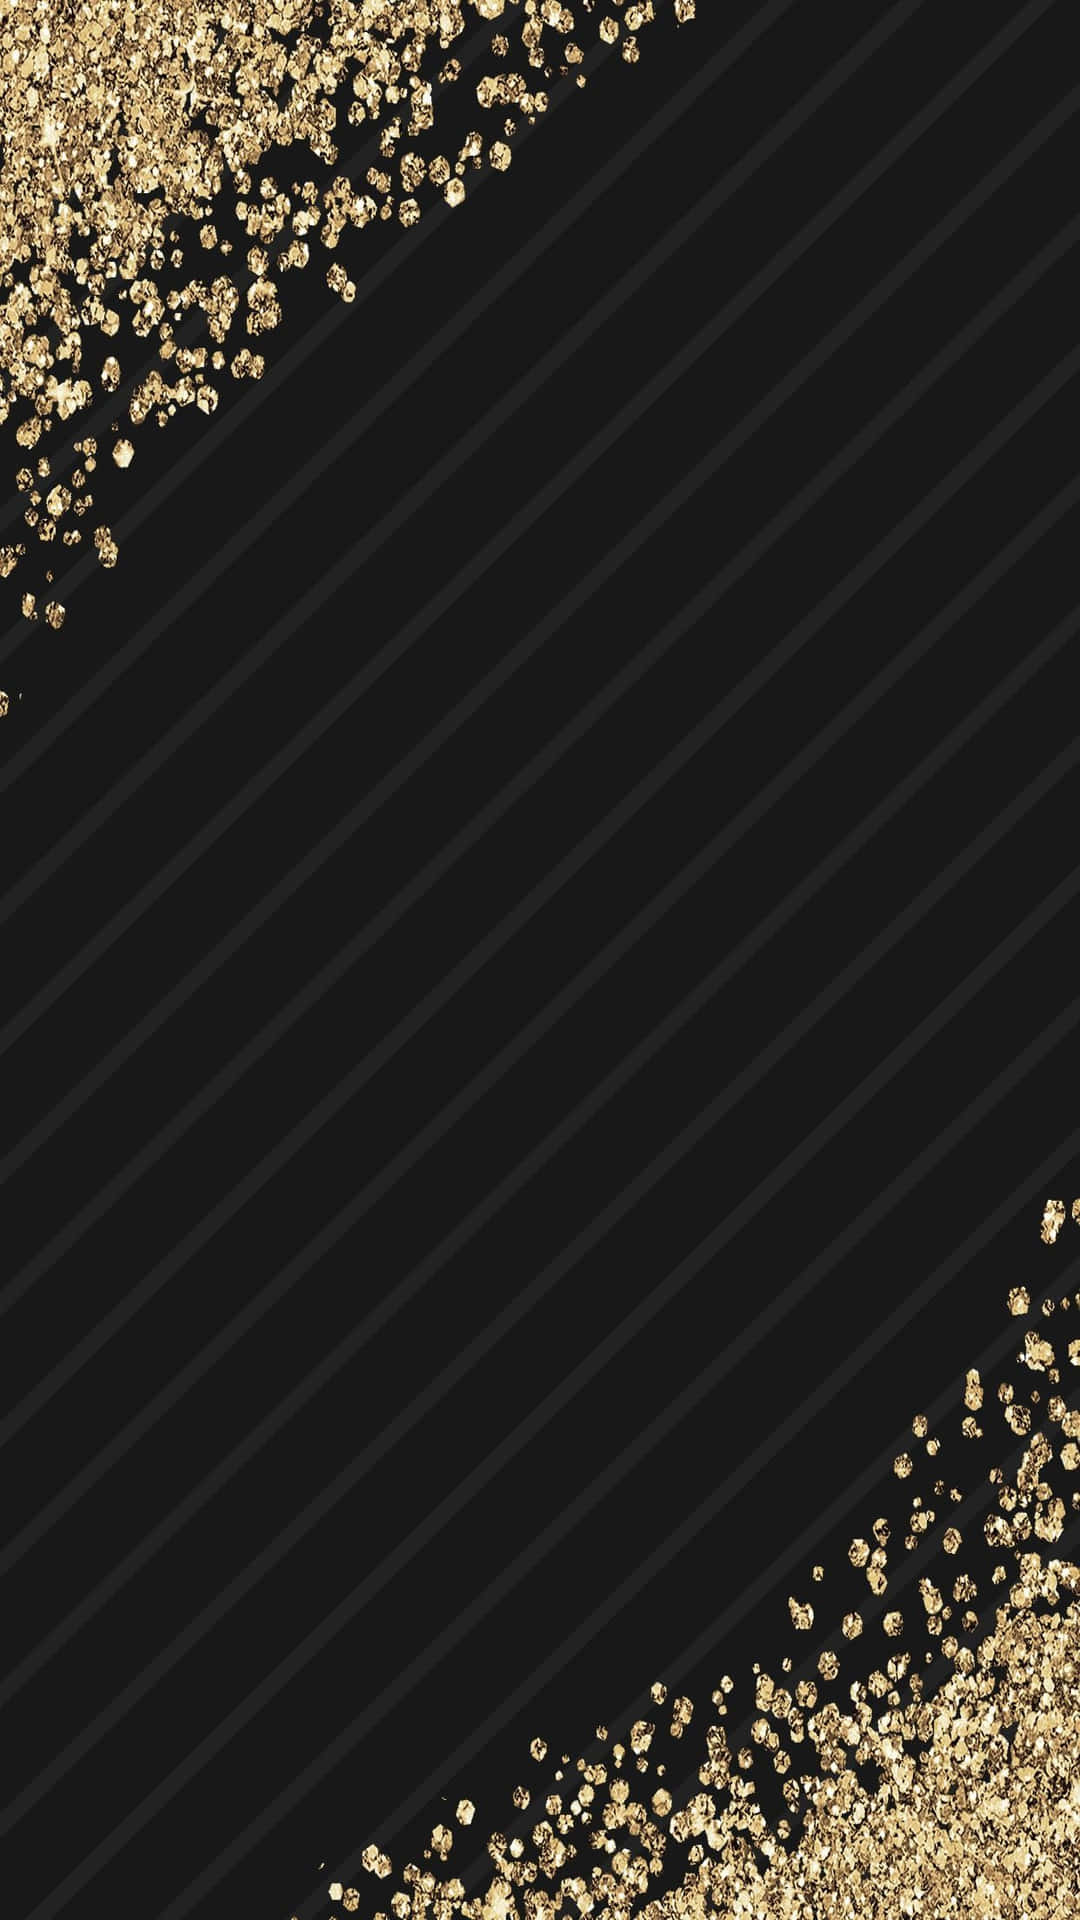 Black And Gold Glitter With Diagonal Line Portrait Wallpaper